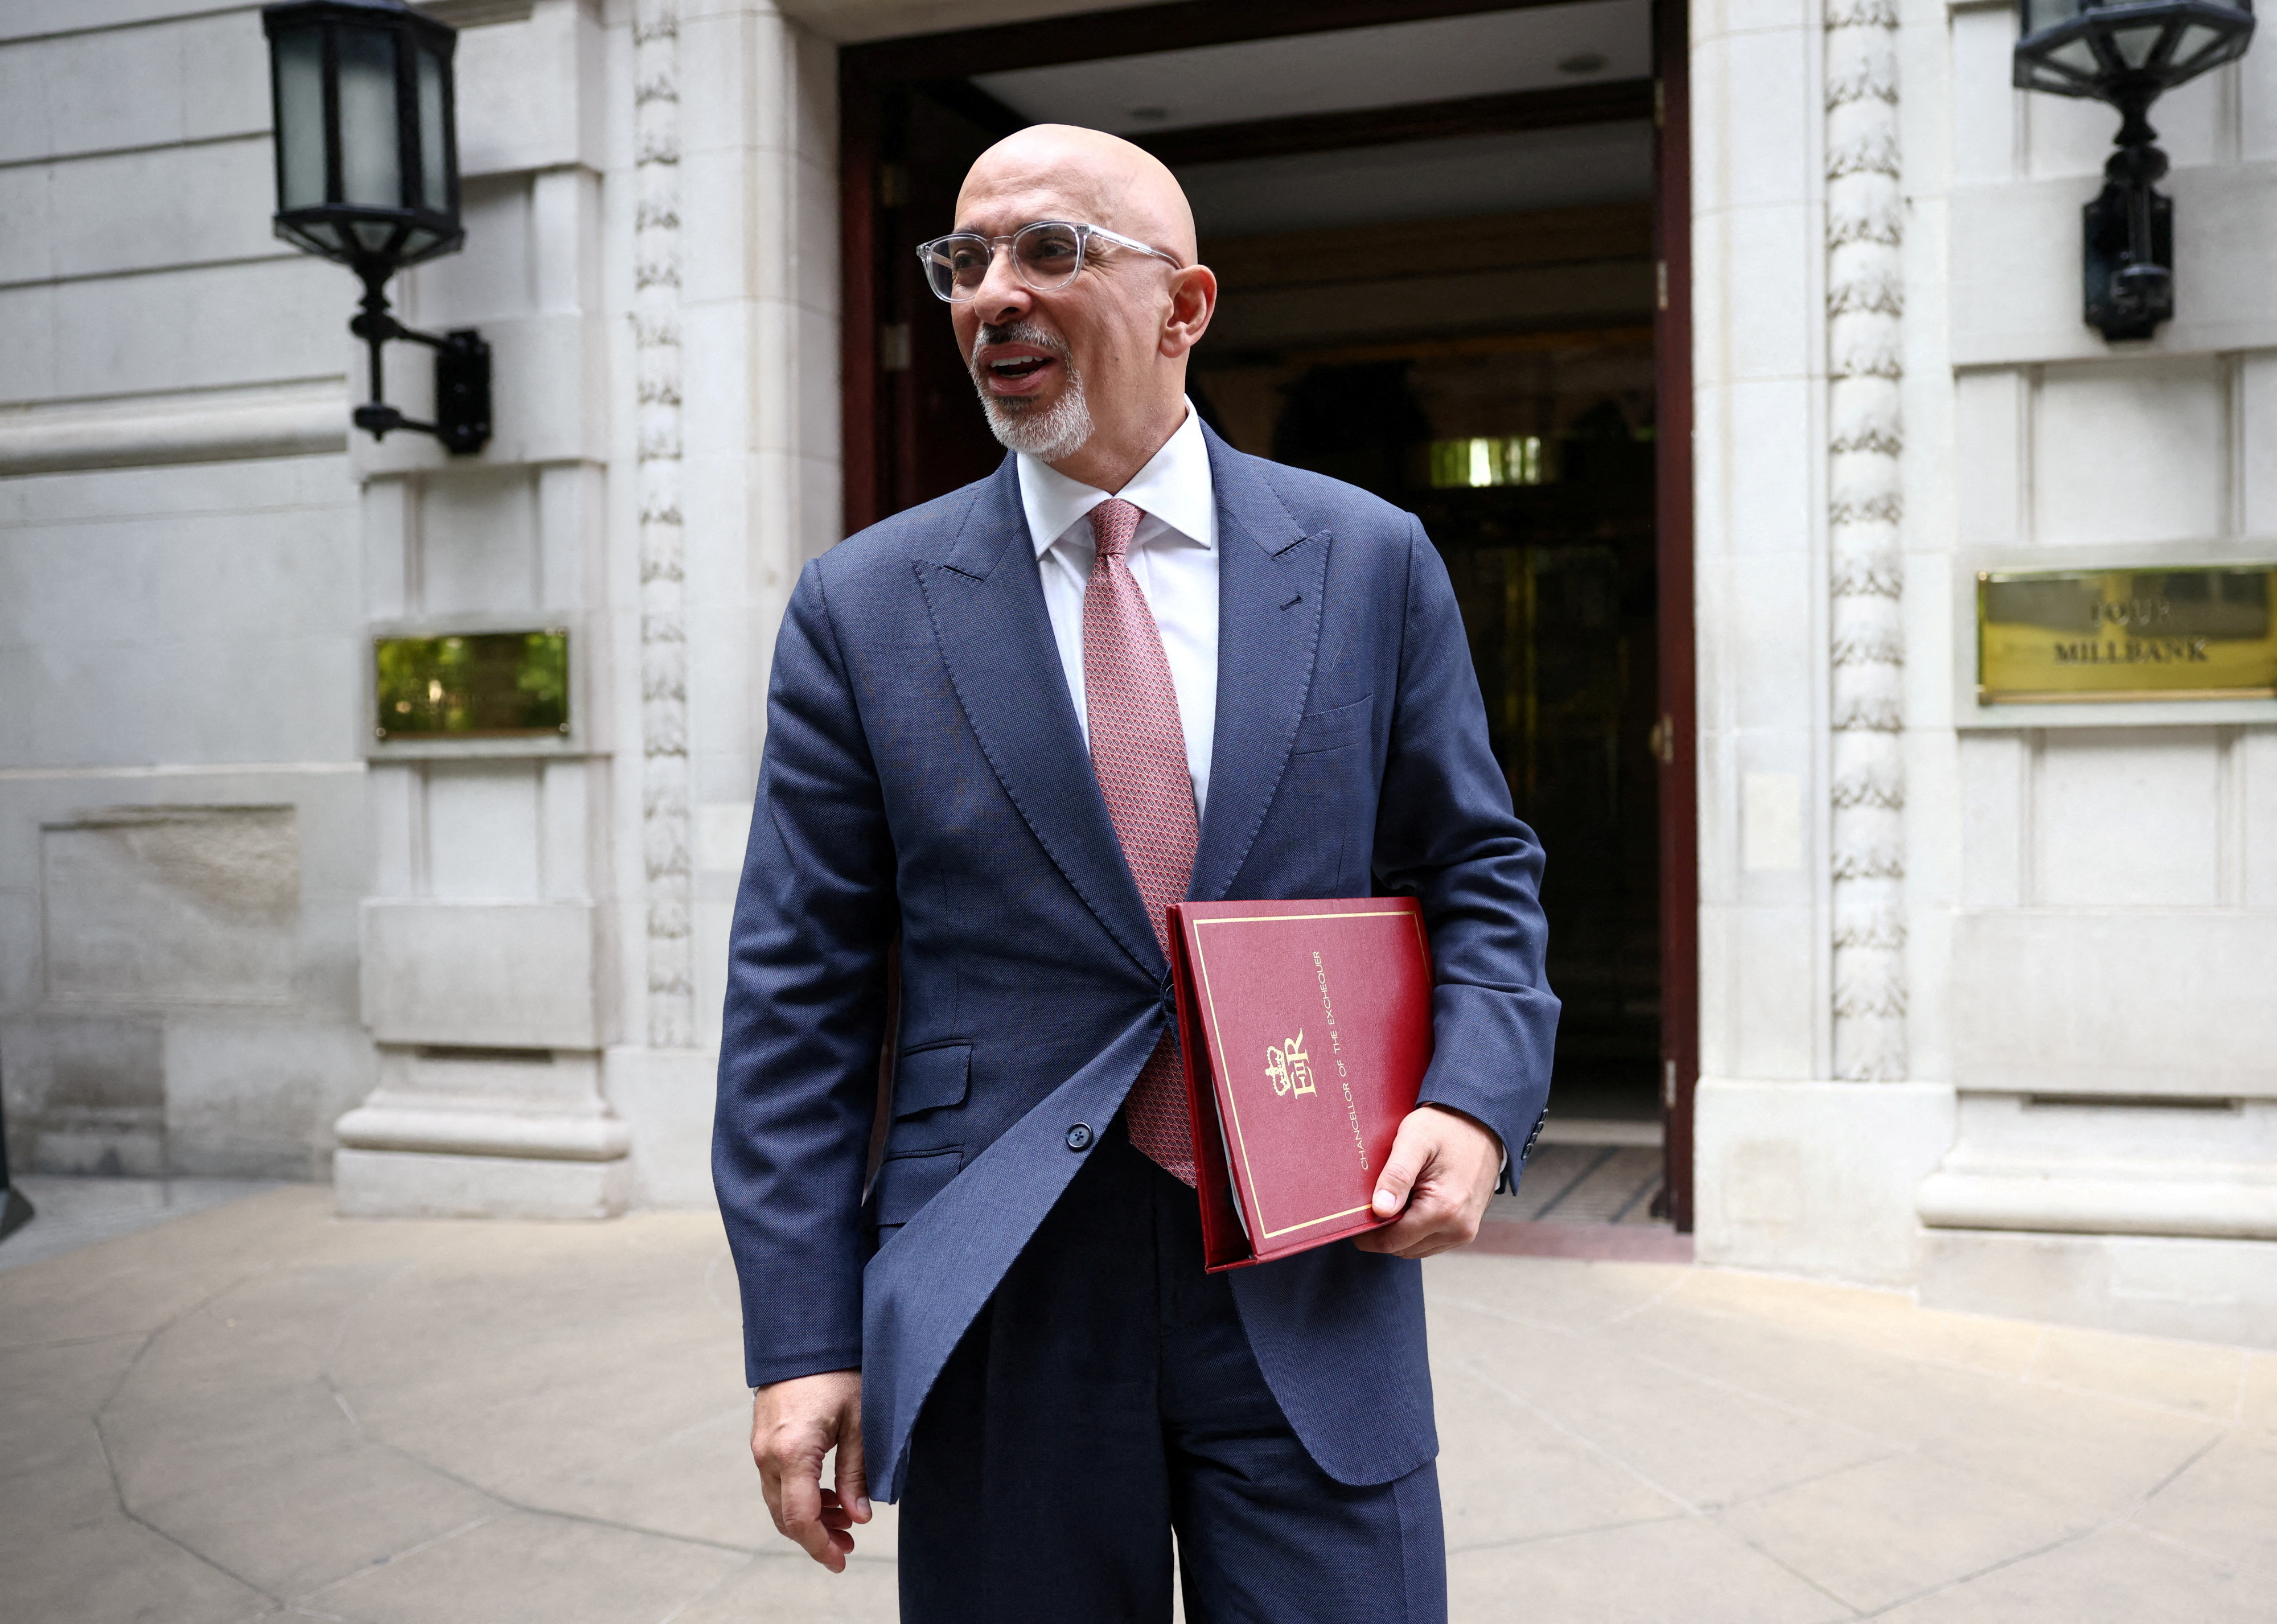 British Chancellor of the Exchequer Nadhim Zahawi leaves a television studio in London